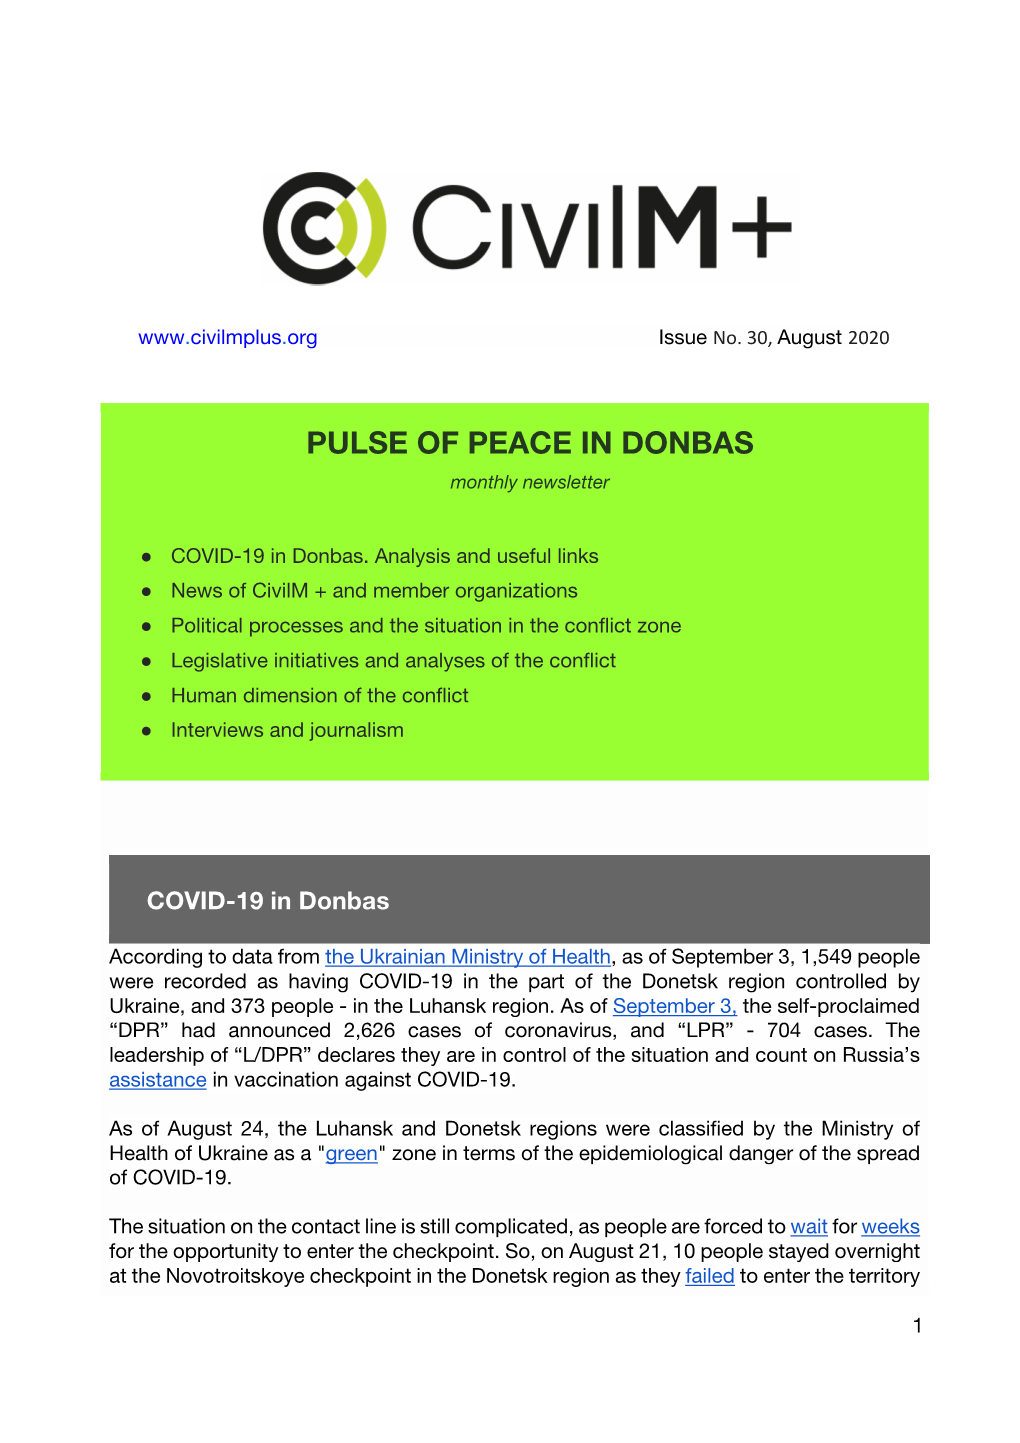 PULSE of PEACE in DONBAS Monthly Newsletter